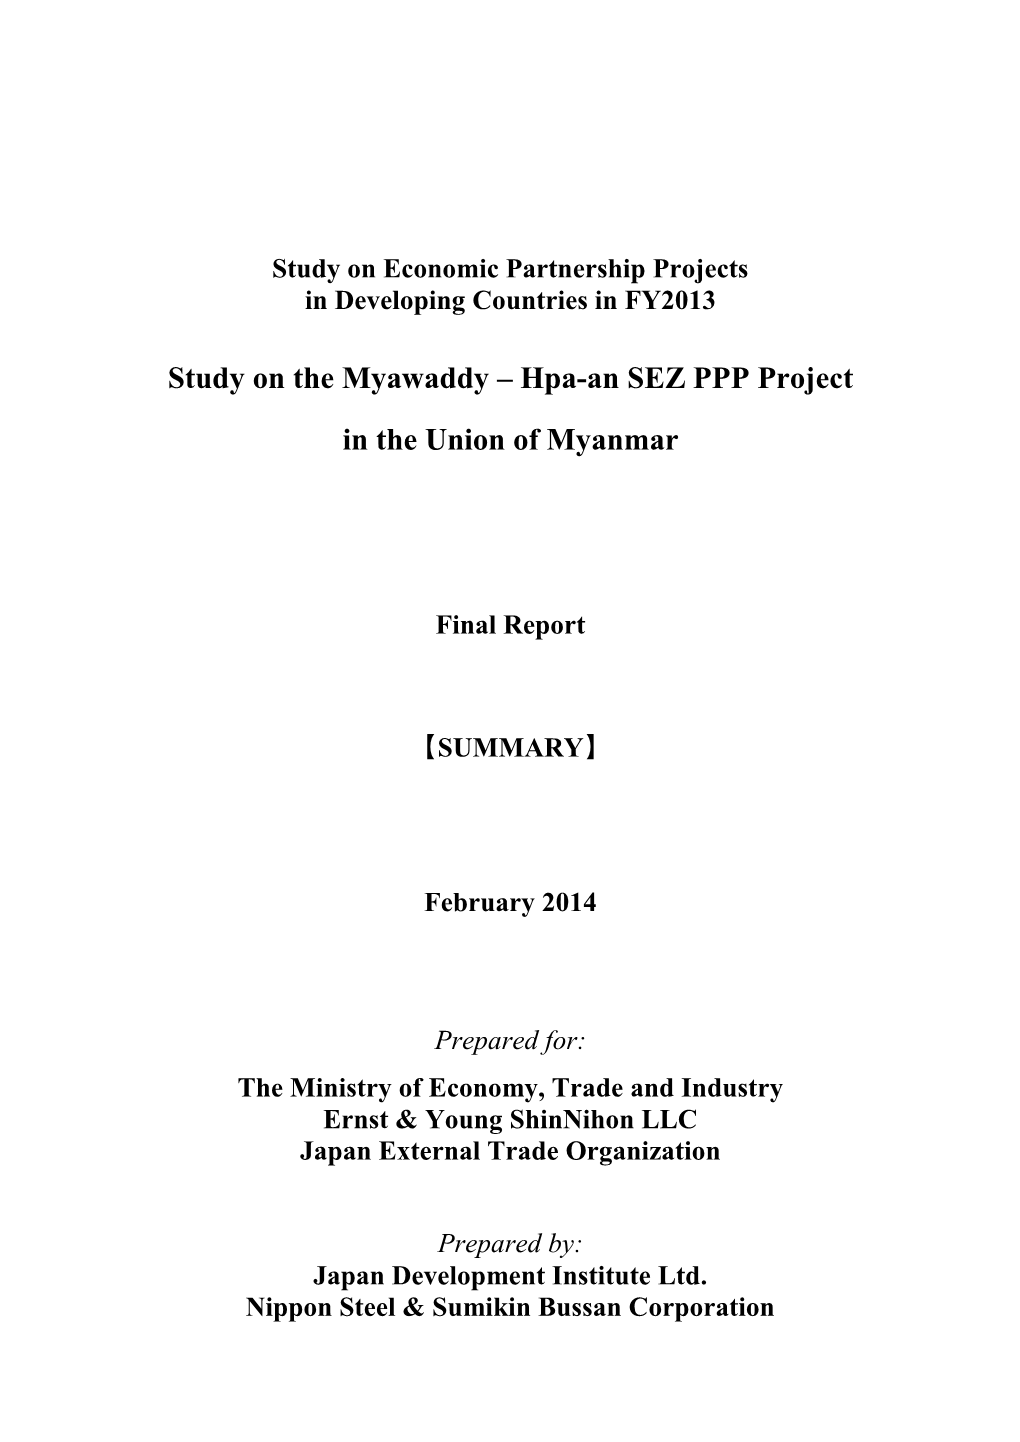 Study on the Myawaddy – Hpa-An SEZ PPP Project in the Union of Myanmar